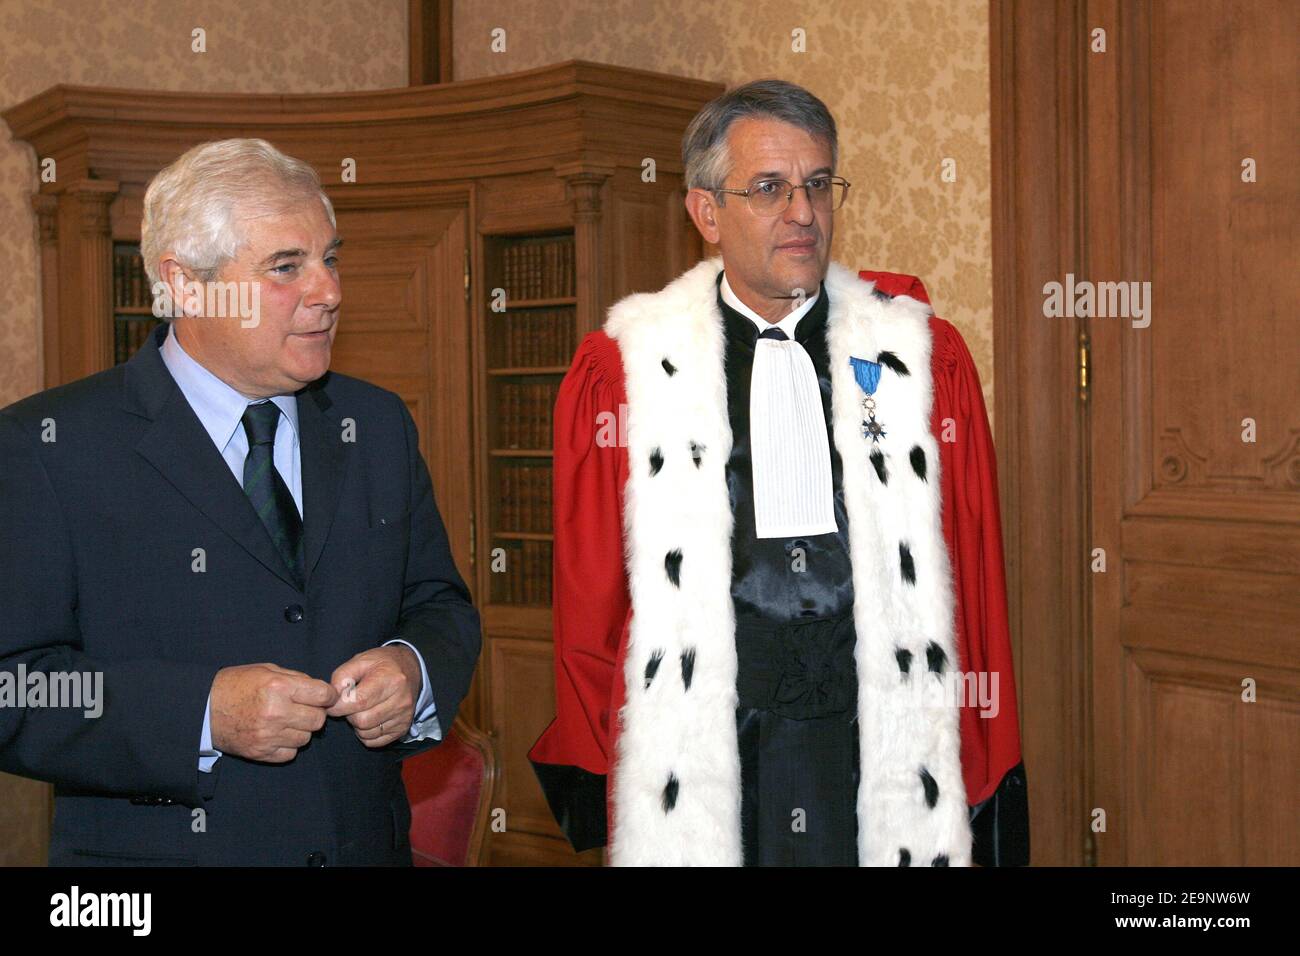 Laurent Le Mesle is appointed as Paris general prosecutor of the Appeal court in presence of Justice Minister, Pascal Clement. Paris, France on October 9, 2006. Photo by Bernard Bisson/ABACAPRESS.COM Stock Photo